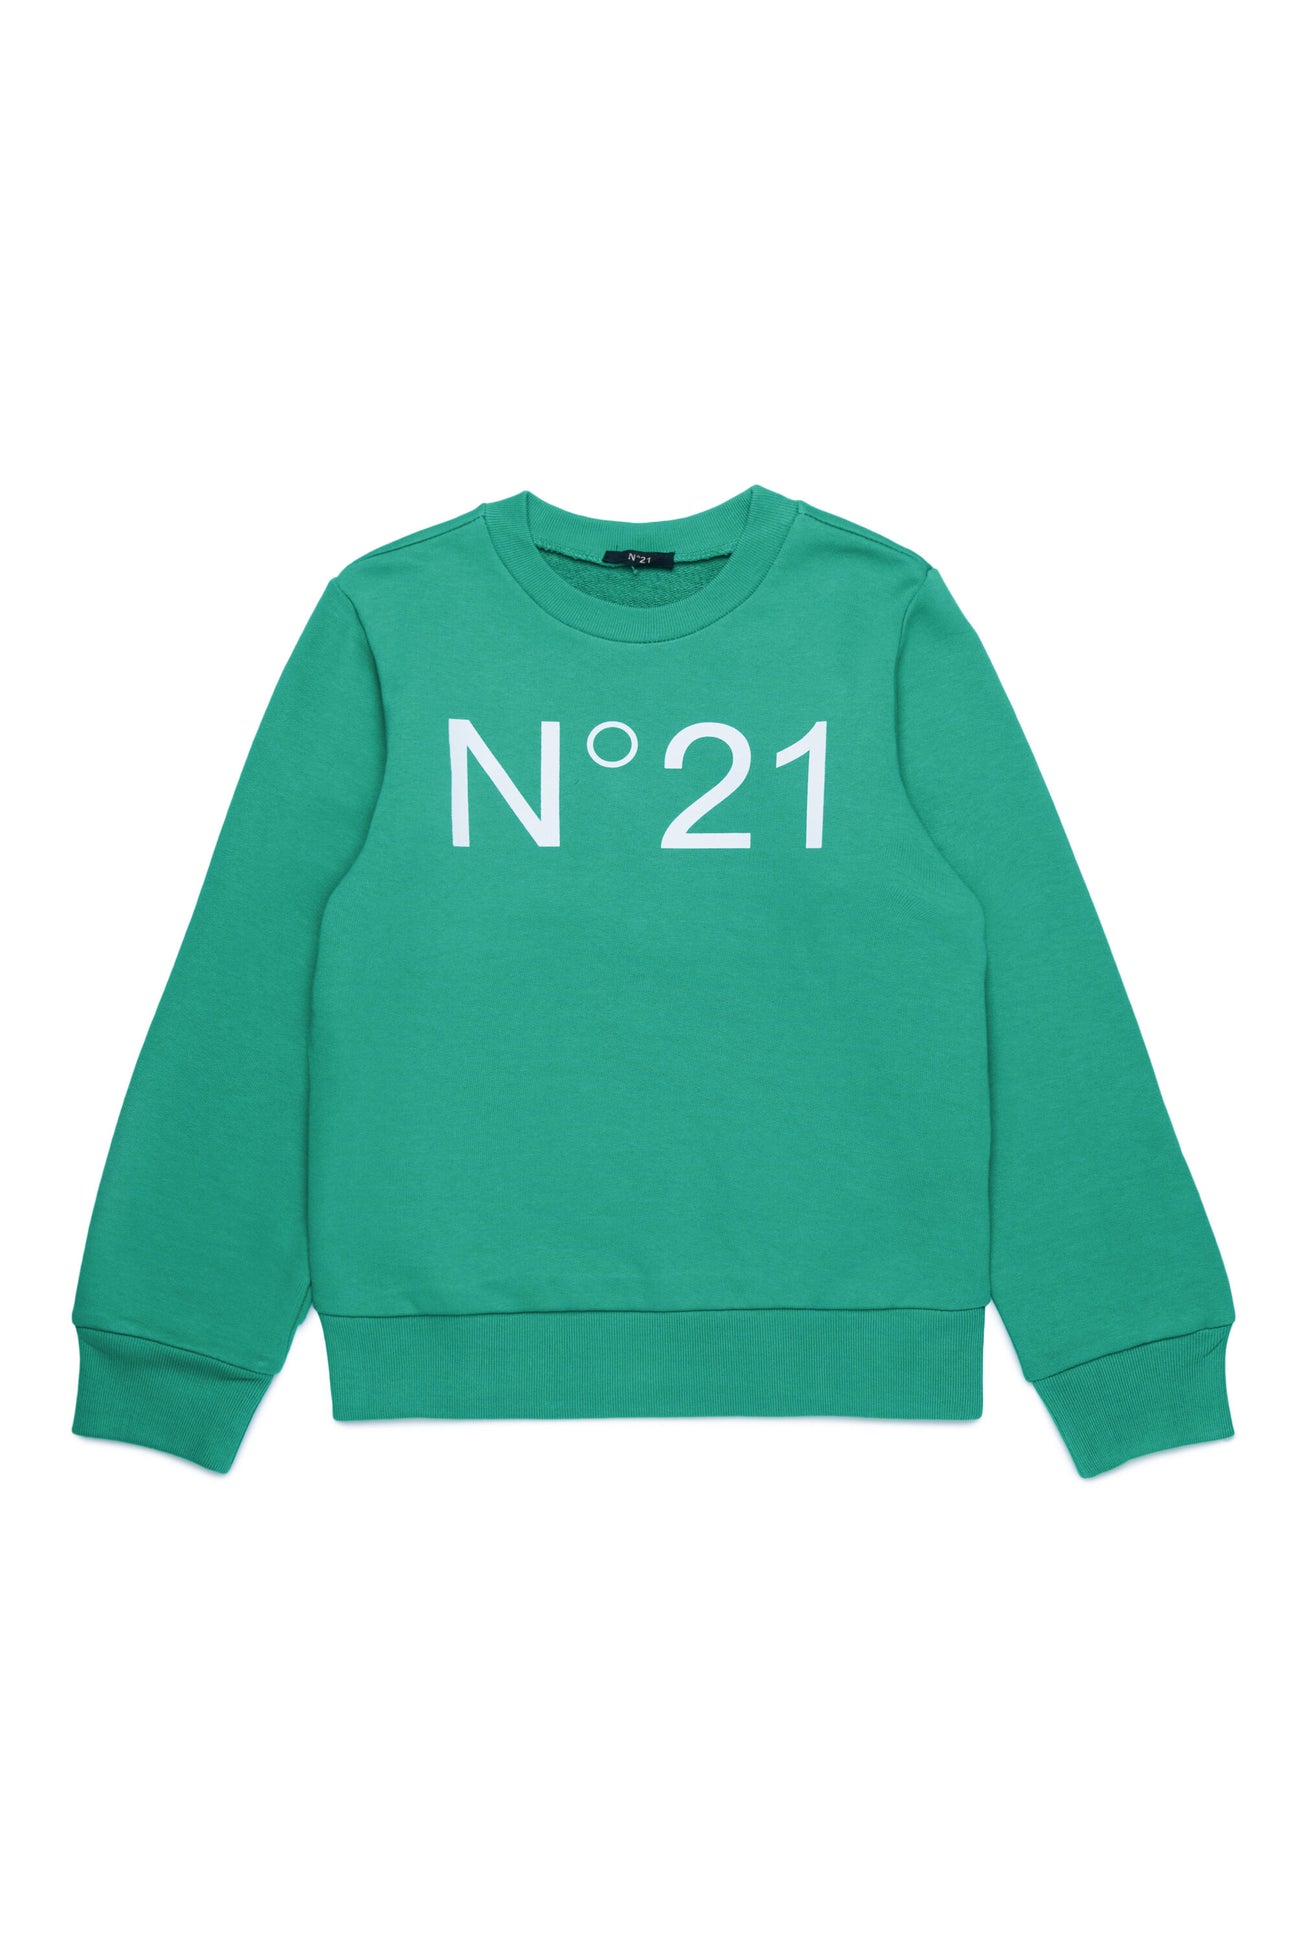 N°21 Clothing Collection for Boys and Girls | Brave Kid